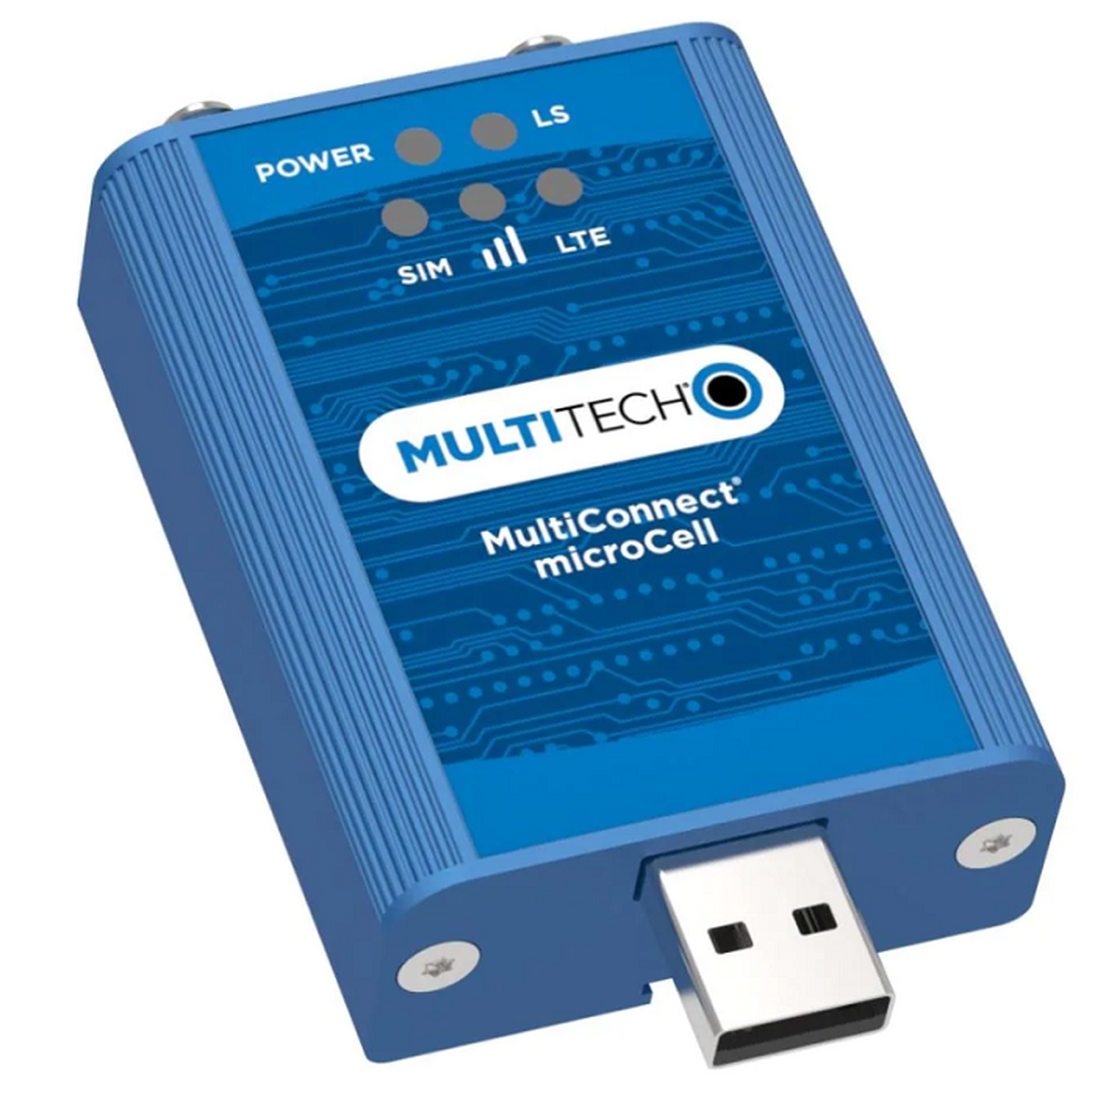 Multitech Multiconnect microcell